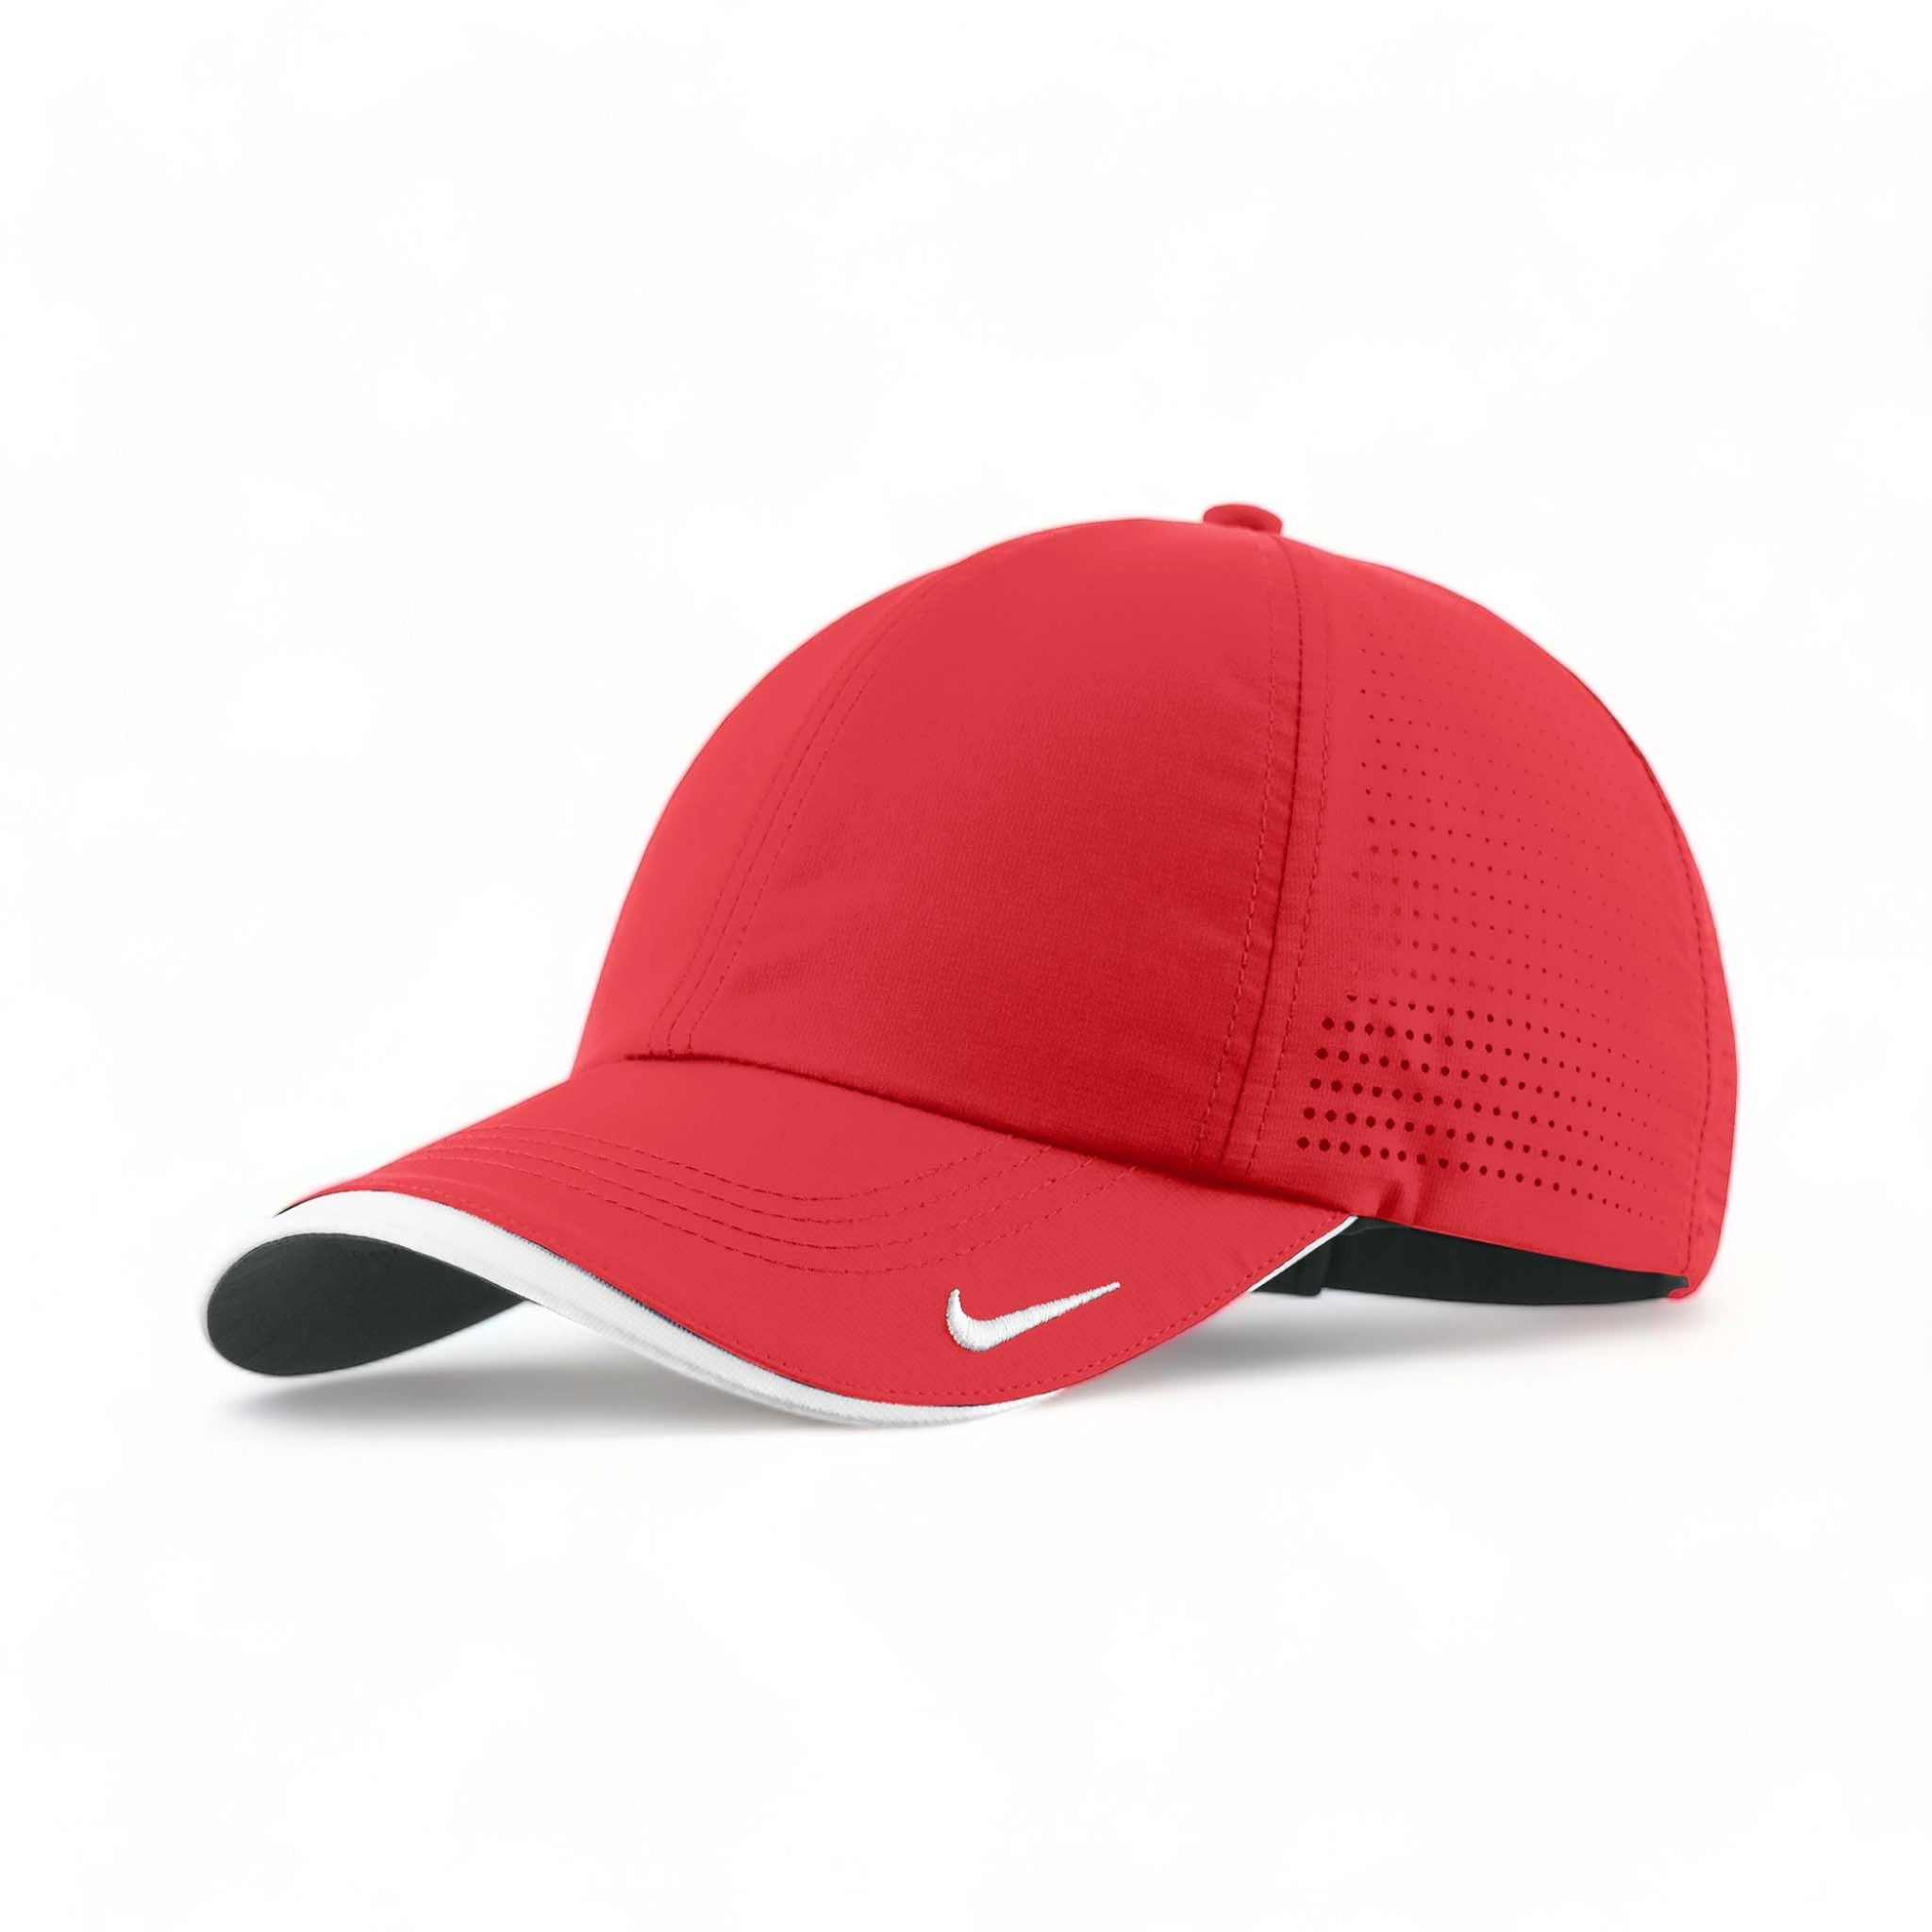 Side view of Nike NKFB6445 custom hat in university red and white